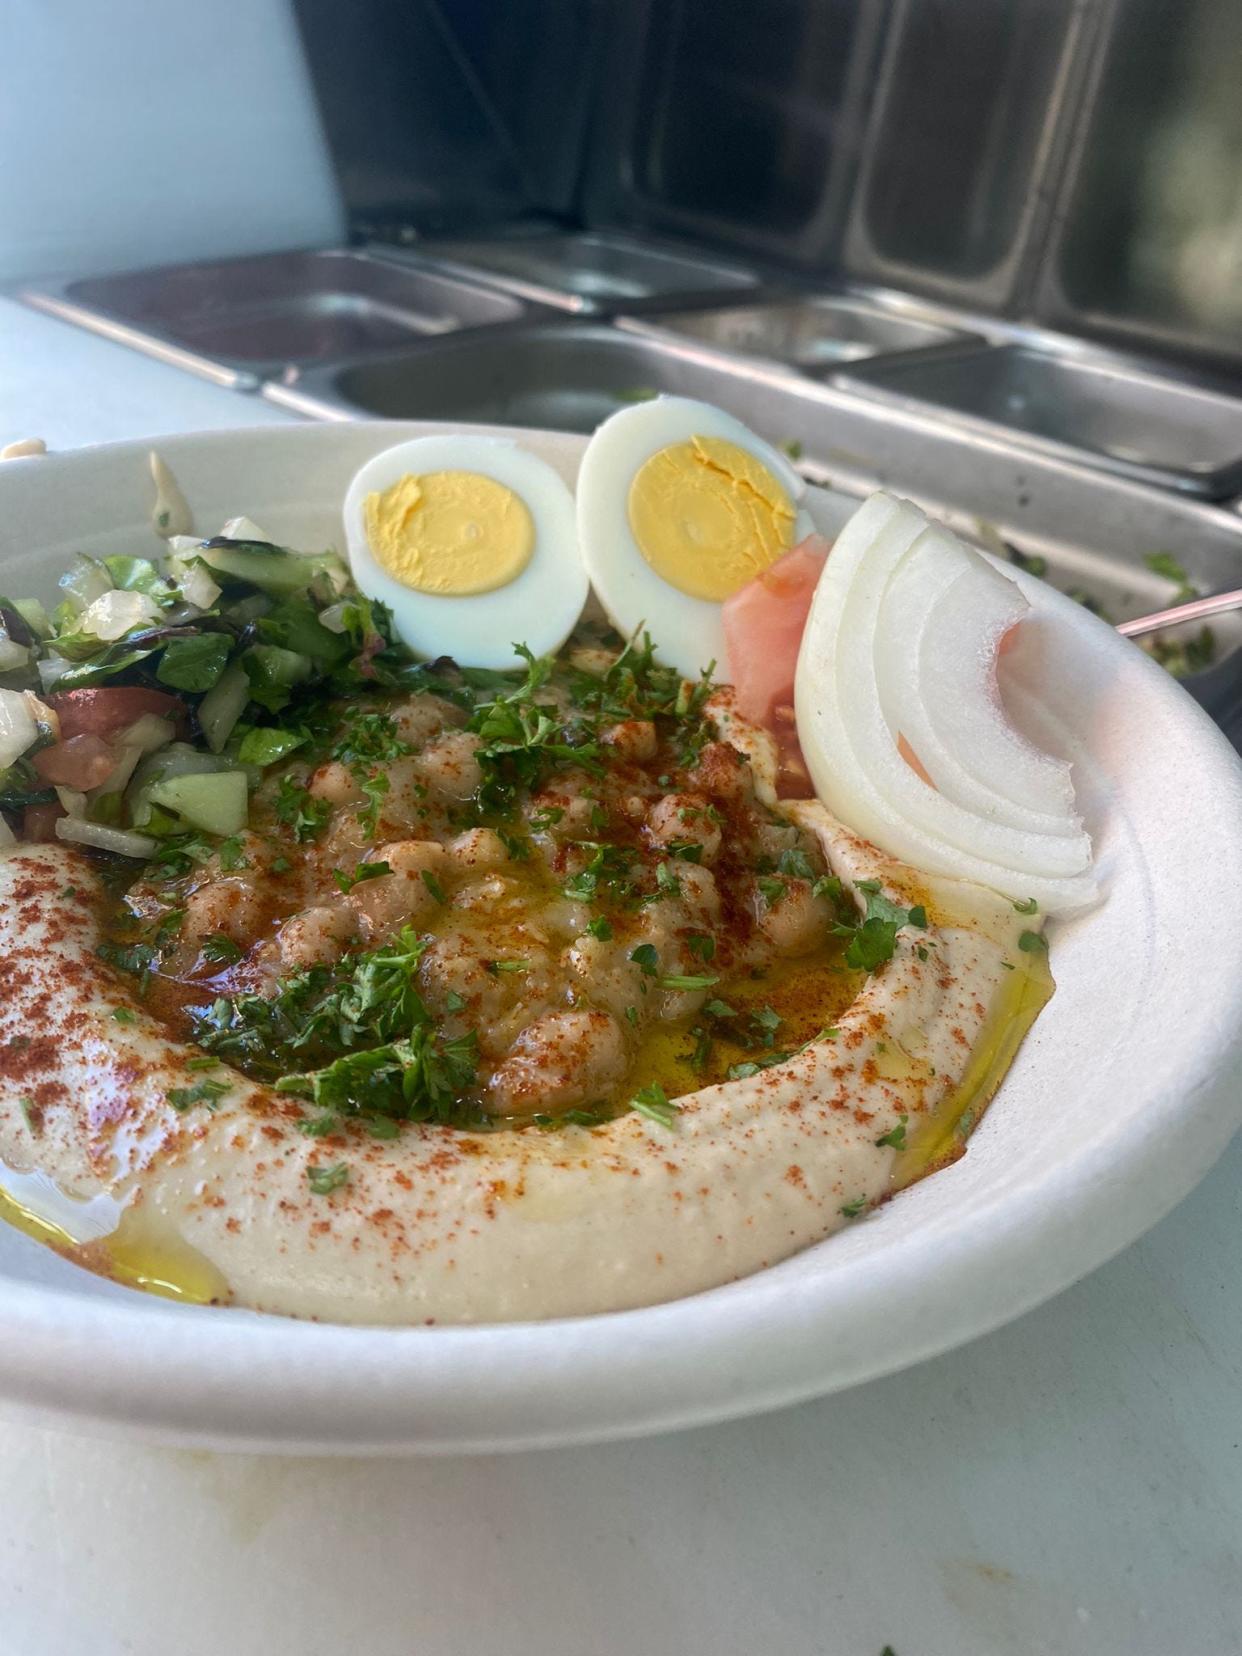 Yalla, a Middle Eastern cuisine food truck, offers Hummus Balagan made with eggplant, hard boiled egg, and chopped salad and served with a warm pita.